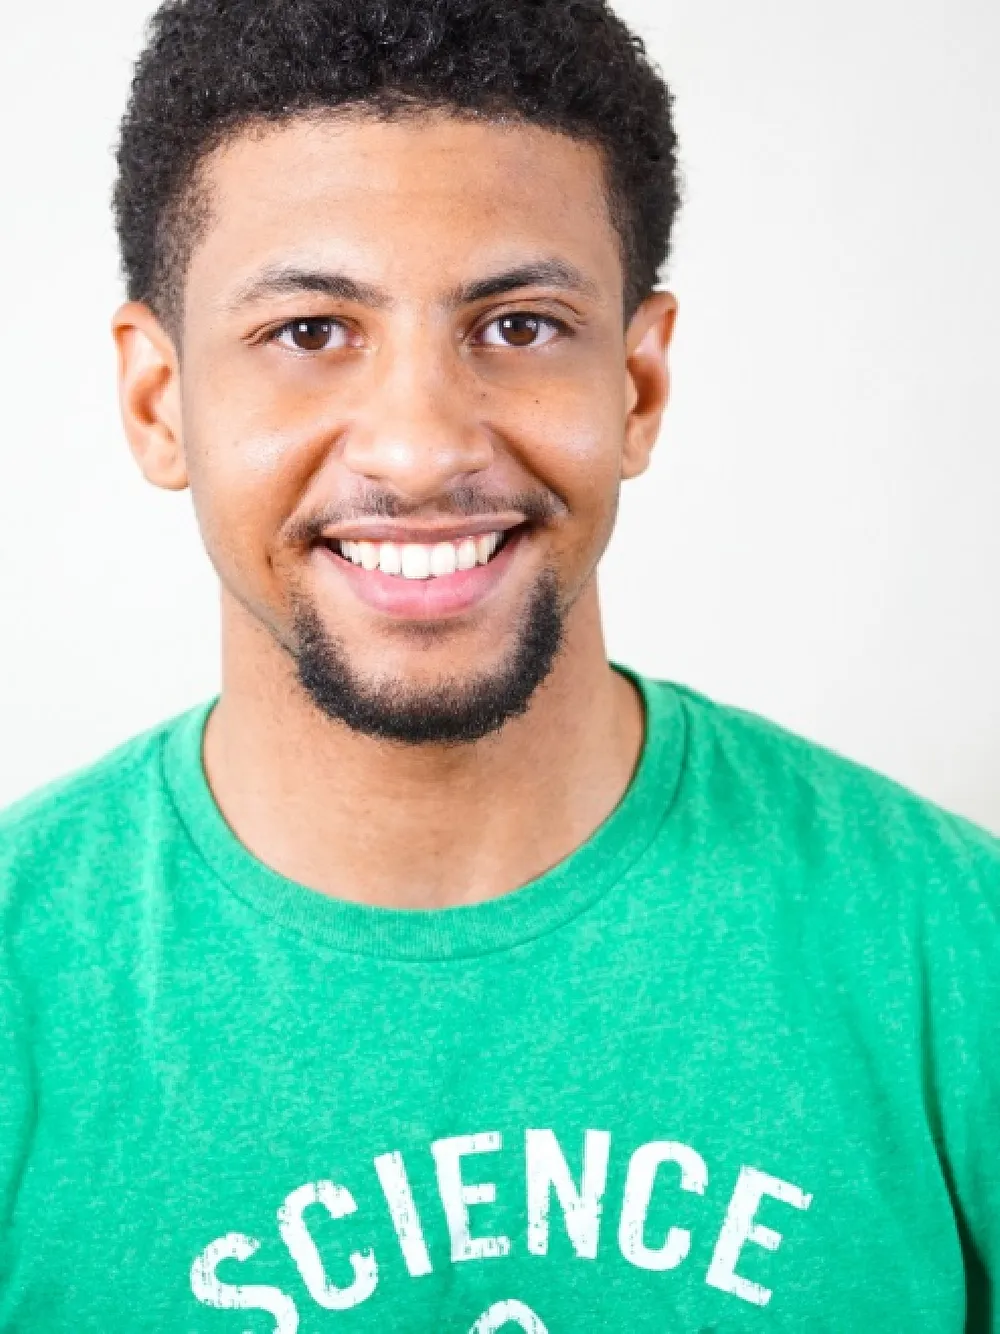 Photo of young man with beard smiling broadly, He's wearing a green shirt.